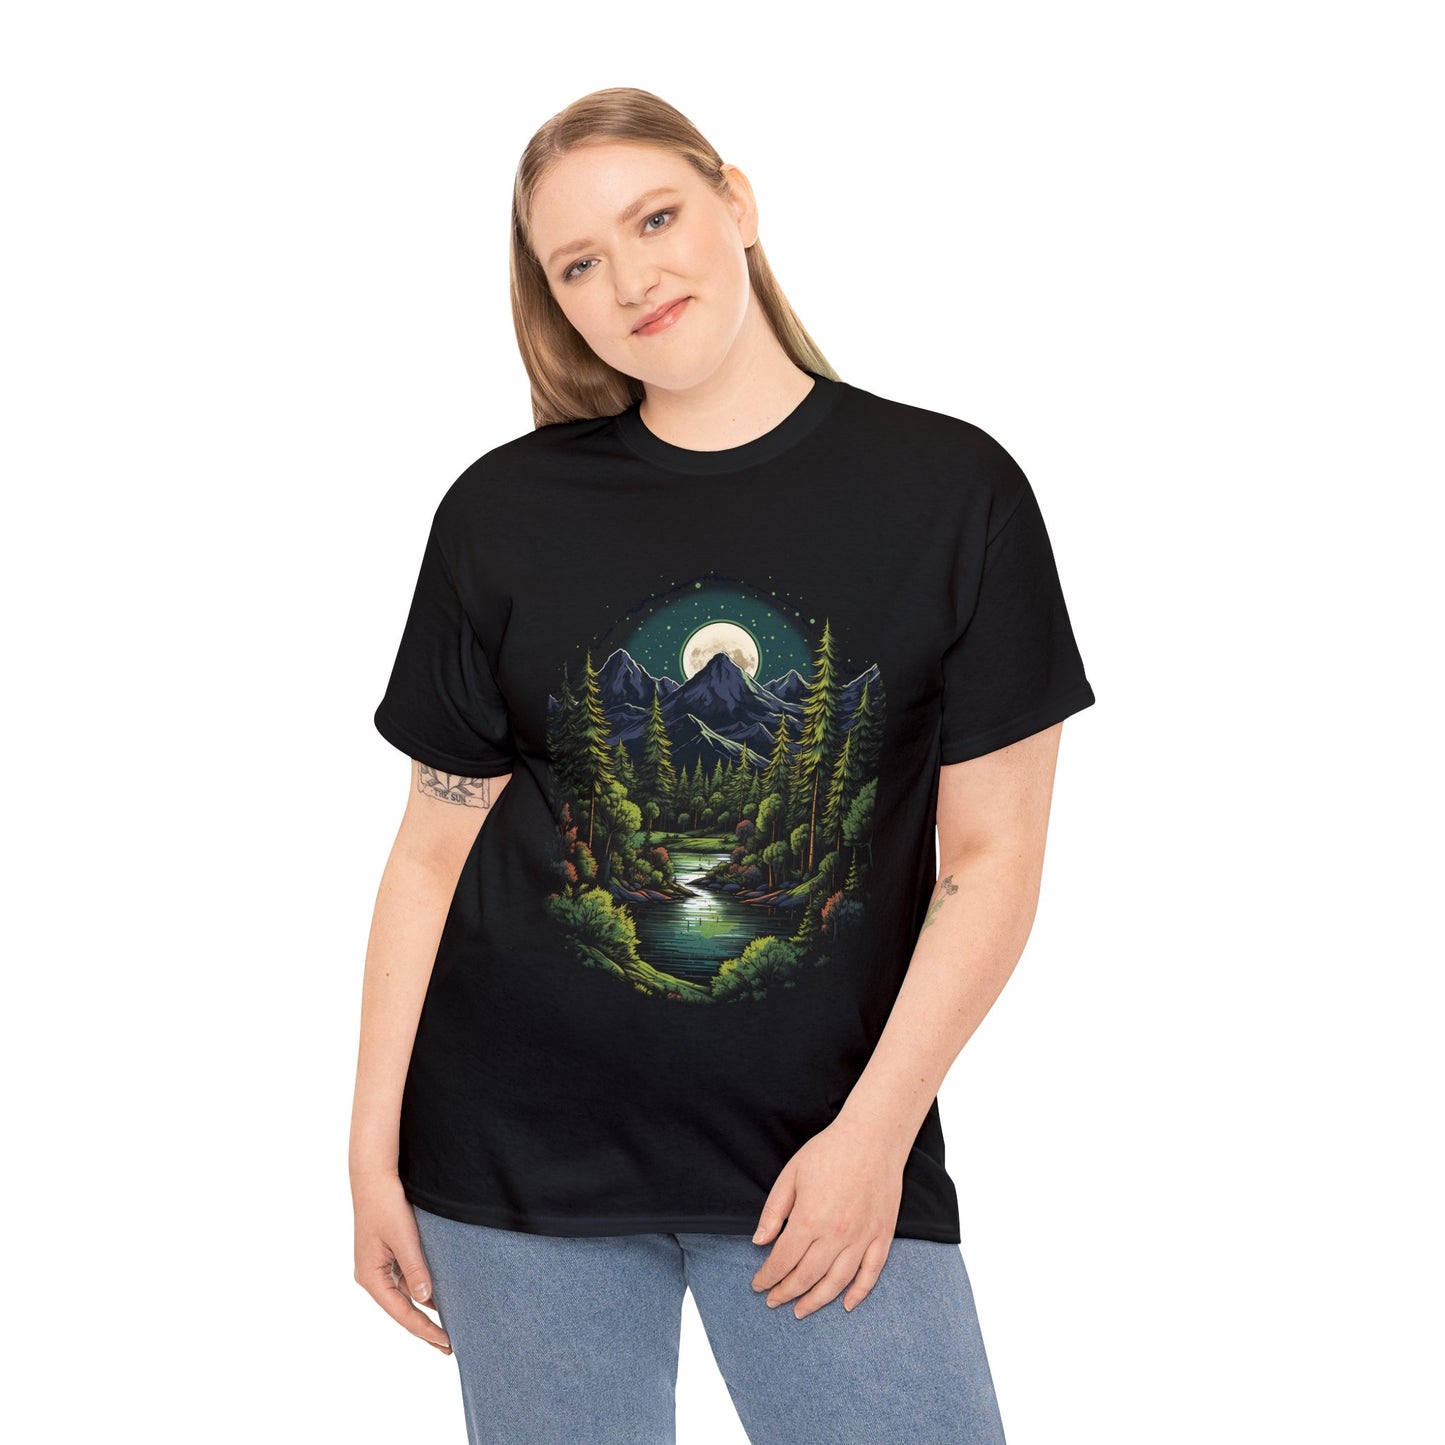 Forest Scenic Mountain Graphic Design Tee